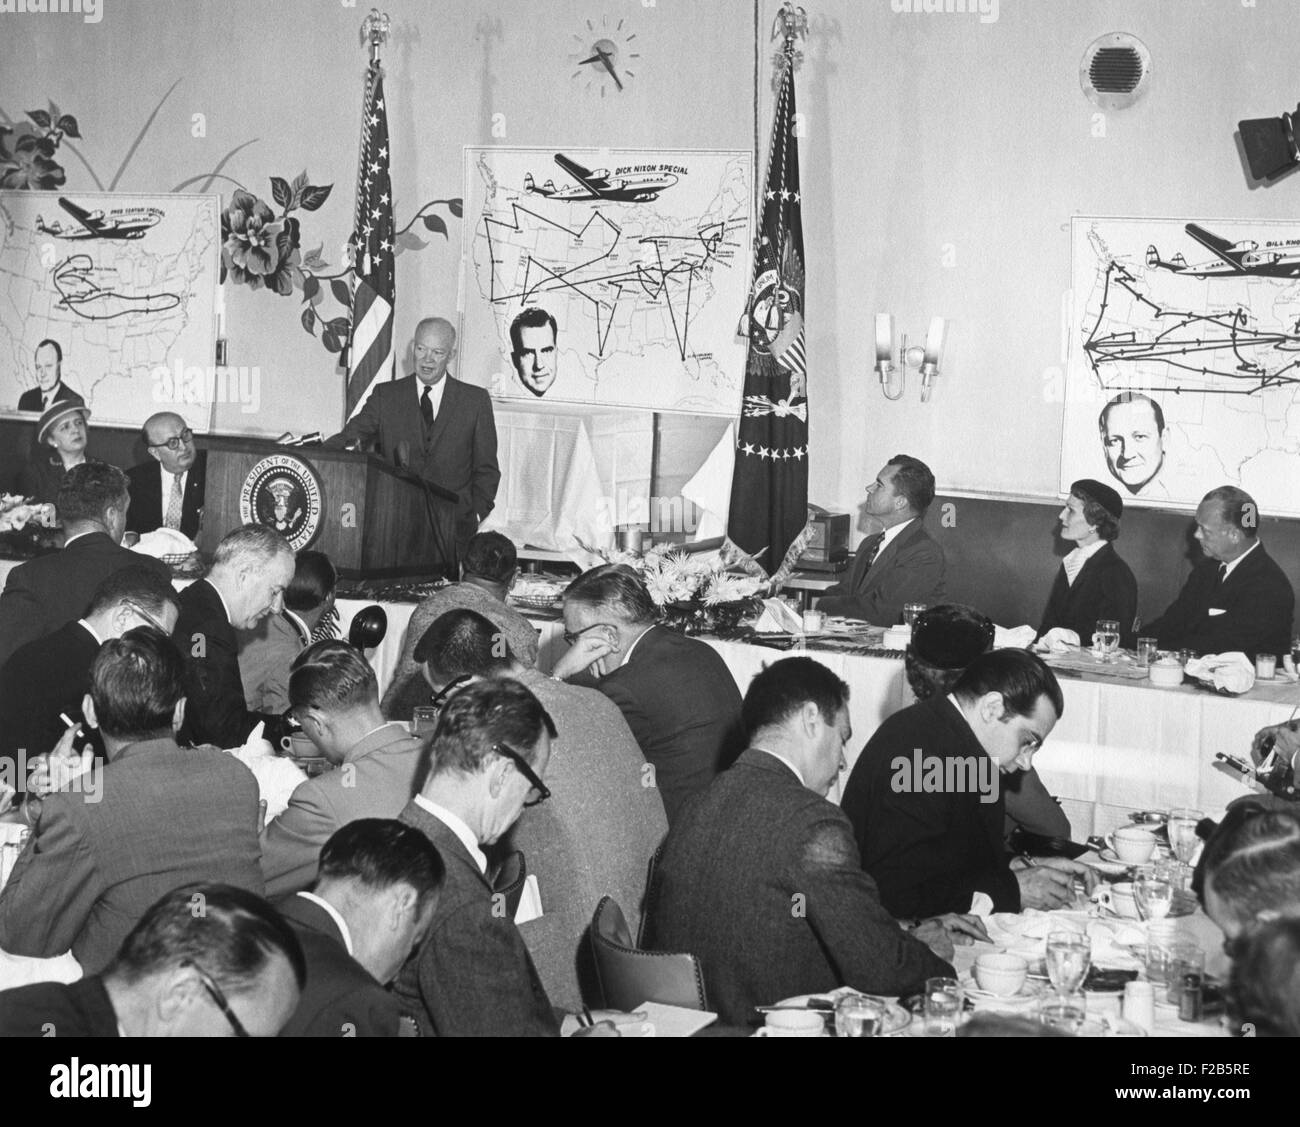 President Eisenhower speaking at a Republican Campaign Kick-off breakfast for VP Richard Nixon. Behind the President, is a map of Nixon's extended campaign trip. Sept. 18, 1956, - (BSLOC 2014 16 8) Stock Photo